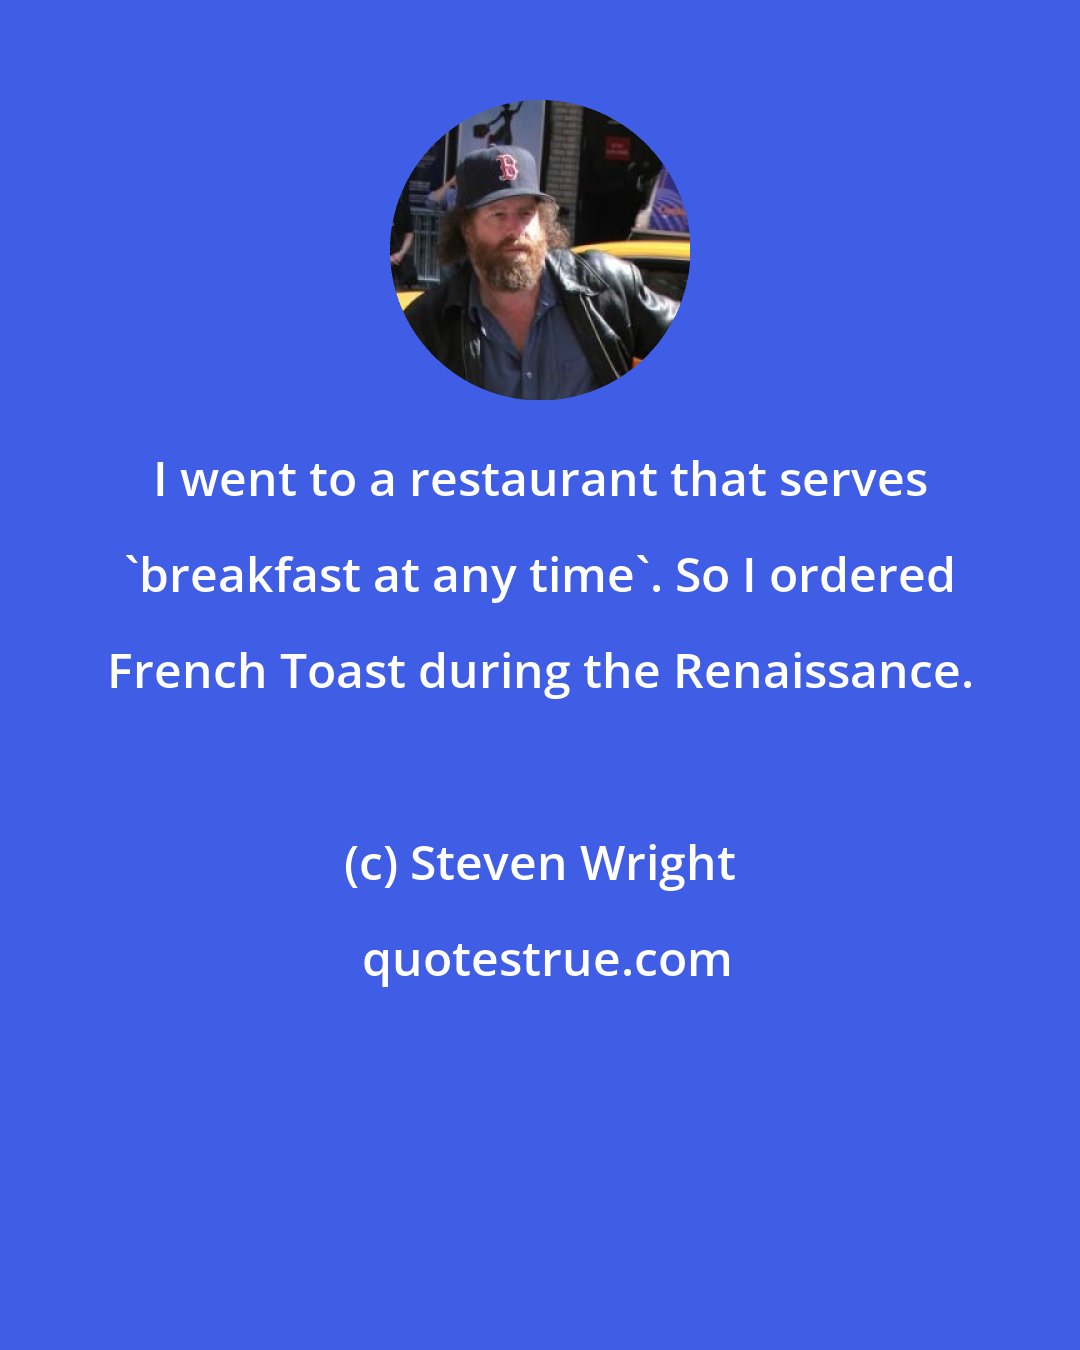 Steven Wright: I went to a restaurant that serves 'breakfast at any time'. So I ordered French Toast during the Renaissance.